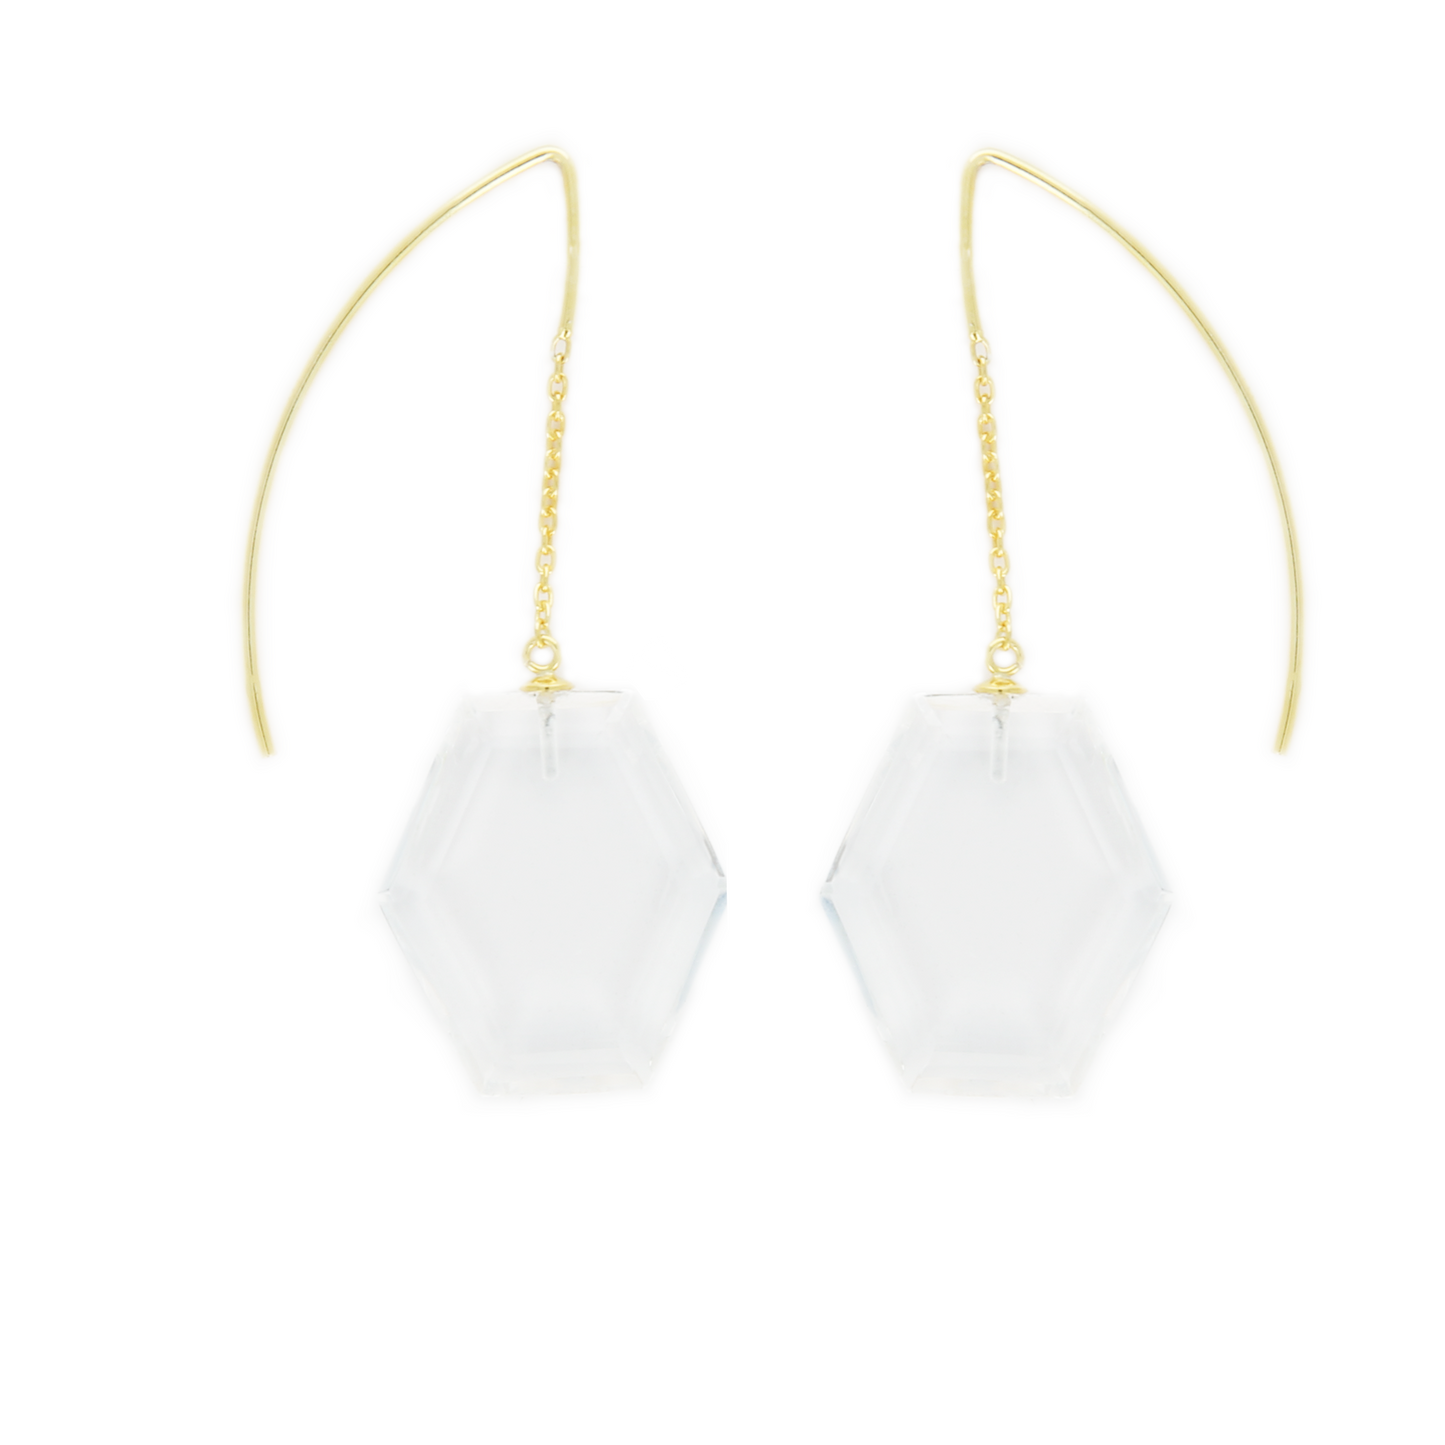 Sterling Silver and Vermeil Wire Drop Earrings